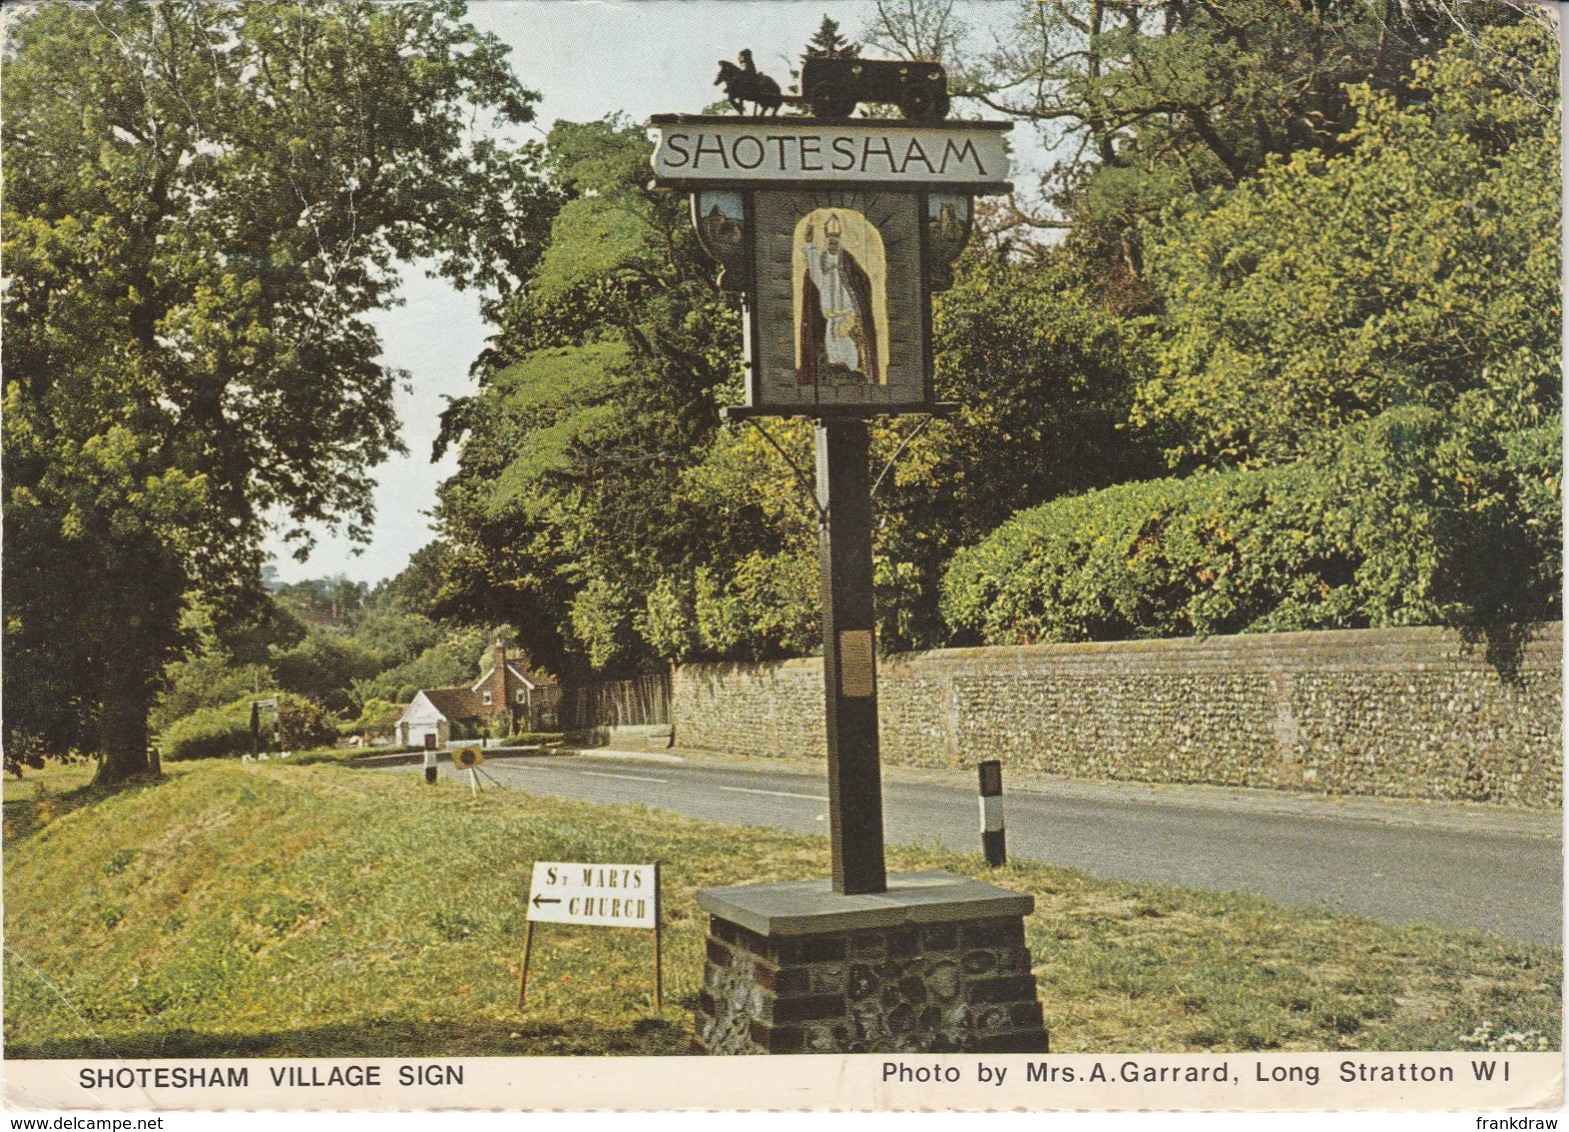 Postcard - Shotesham Village Sign - Photo By Mrs A. Garrard No Card No.. Unused Very Good - Unclassified